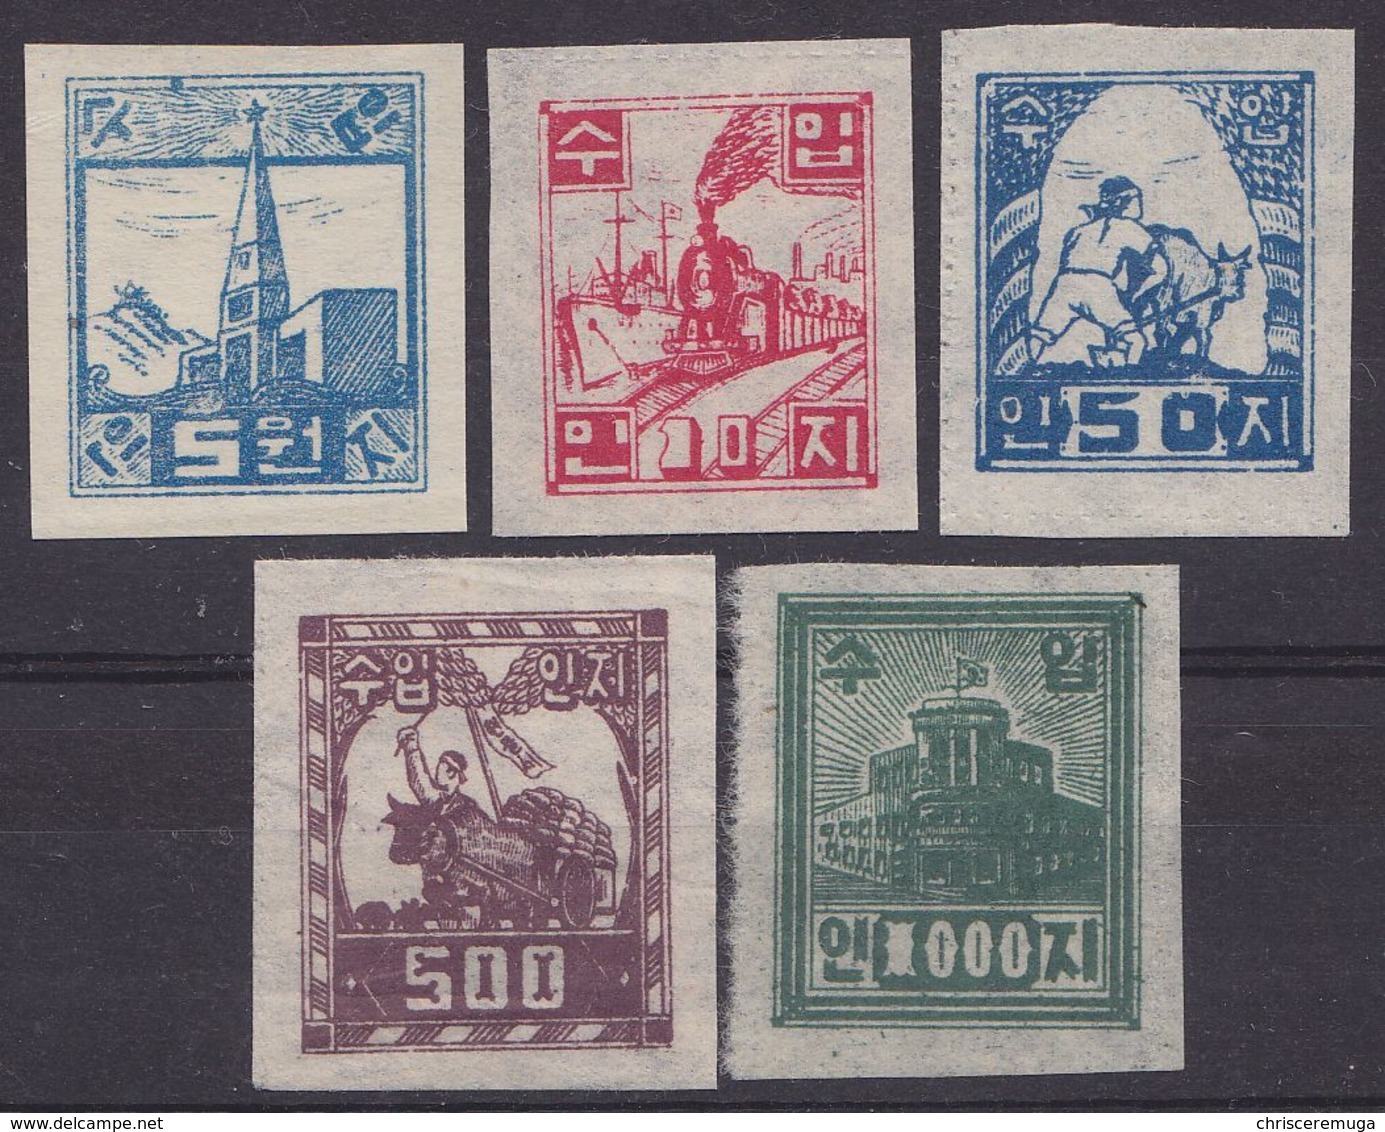 NORTH KOREA RUSSIA 1950 Early Revenues 5w To 1000w, Rouletted Or Imperf. Chinese Intervention Korean War - Sibirien Und Fernost